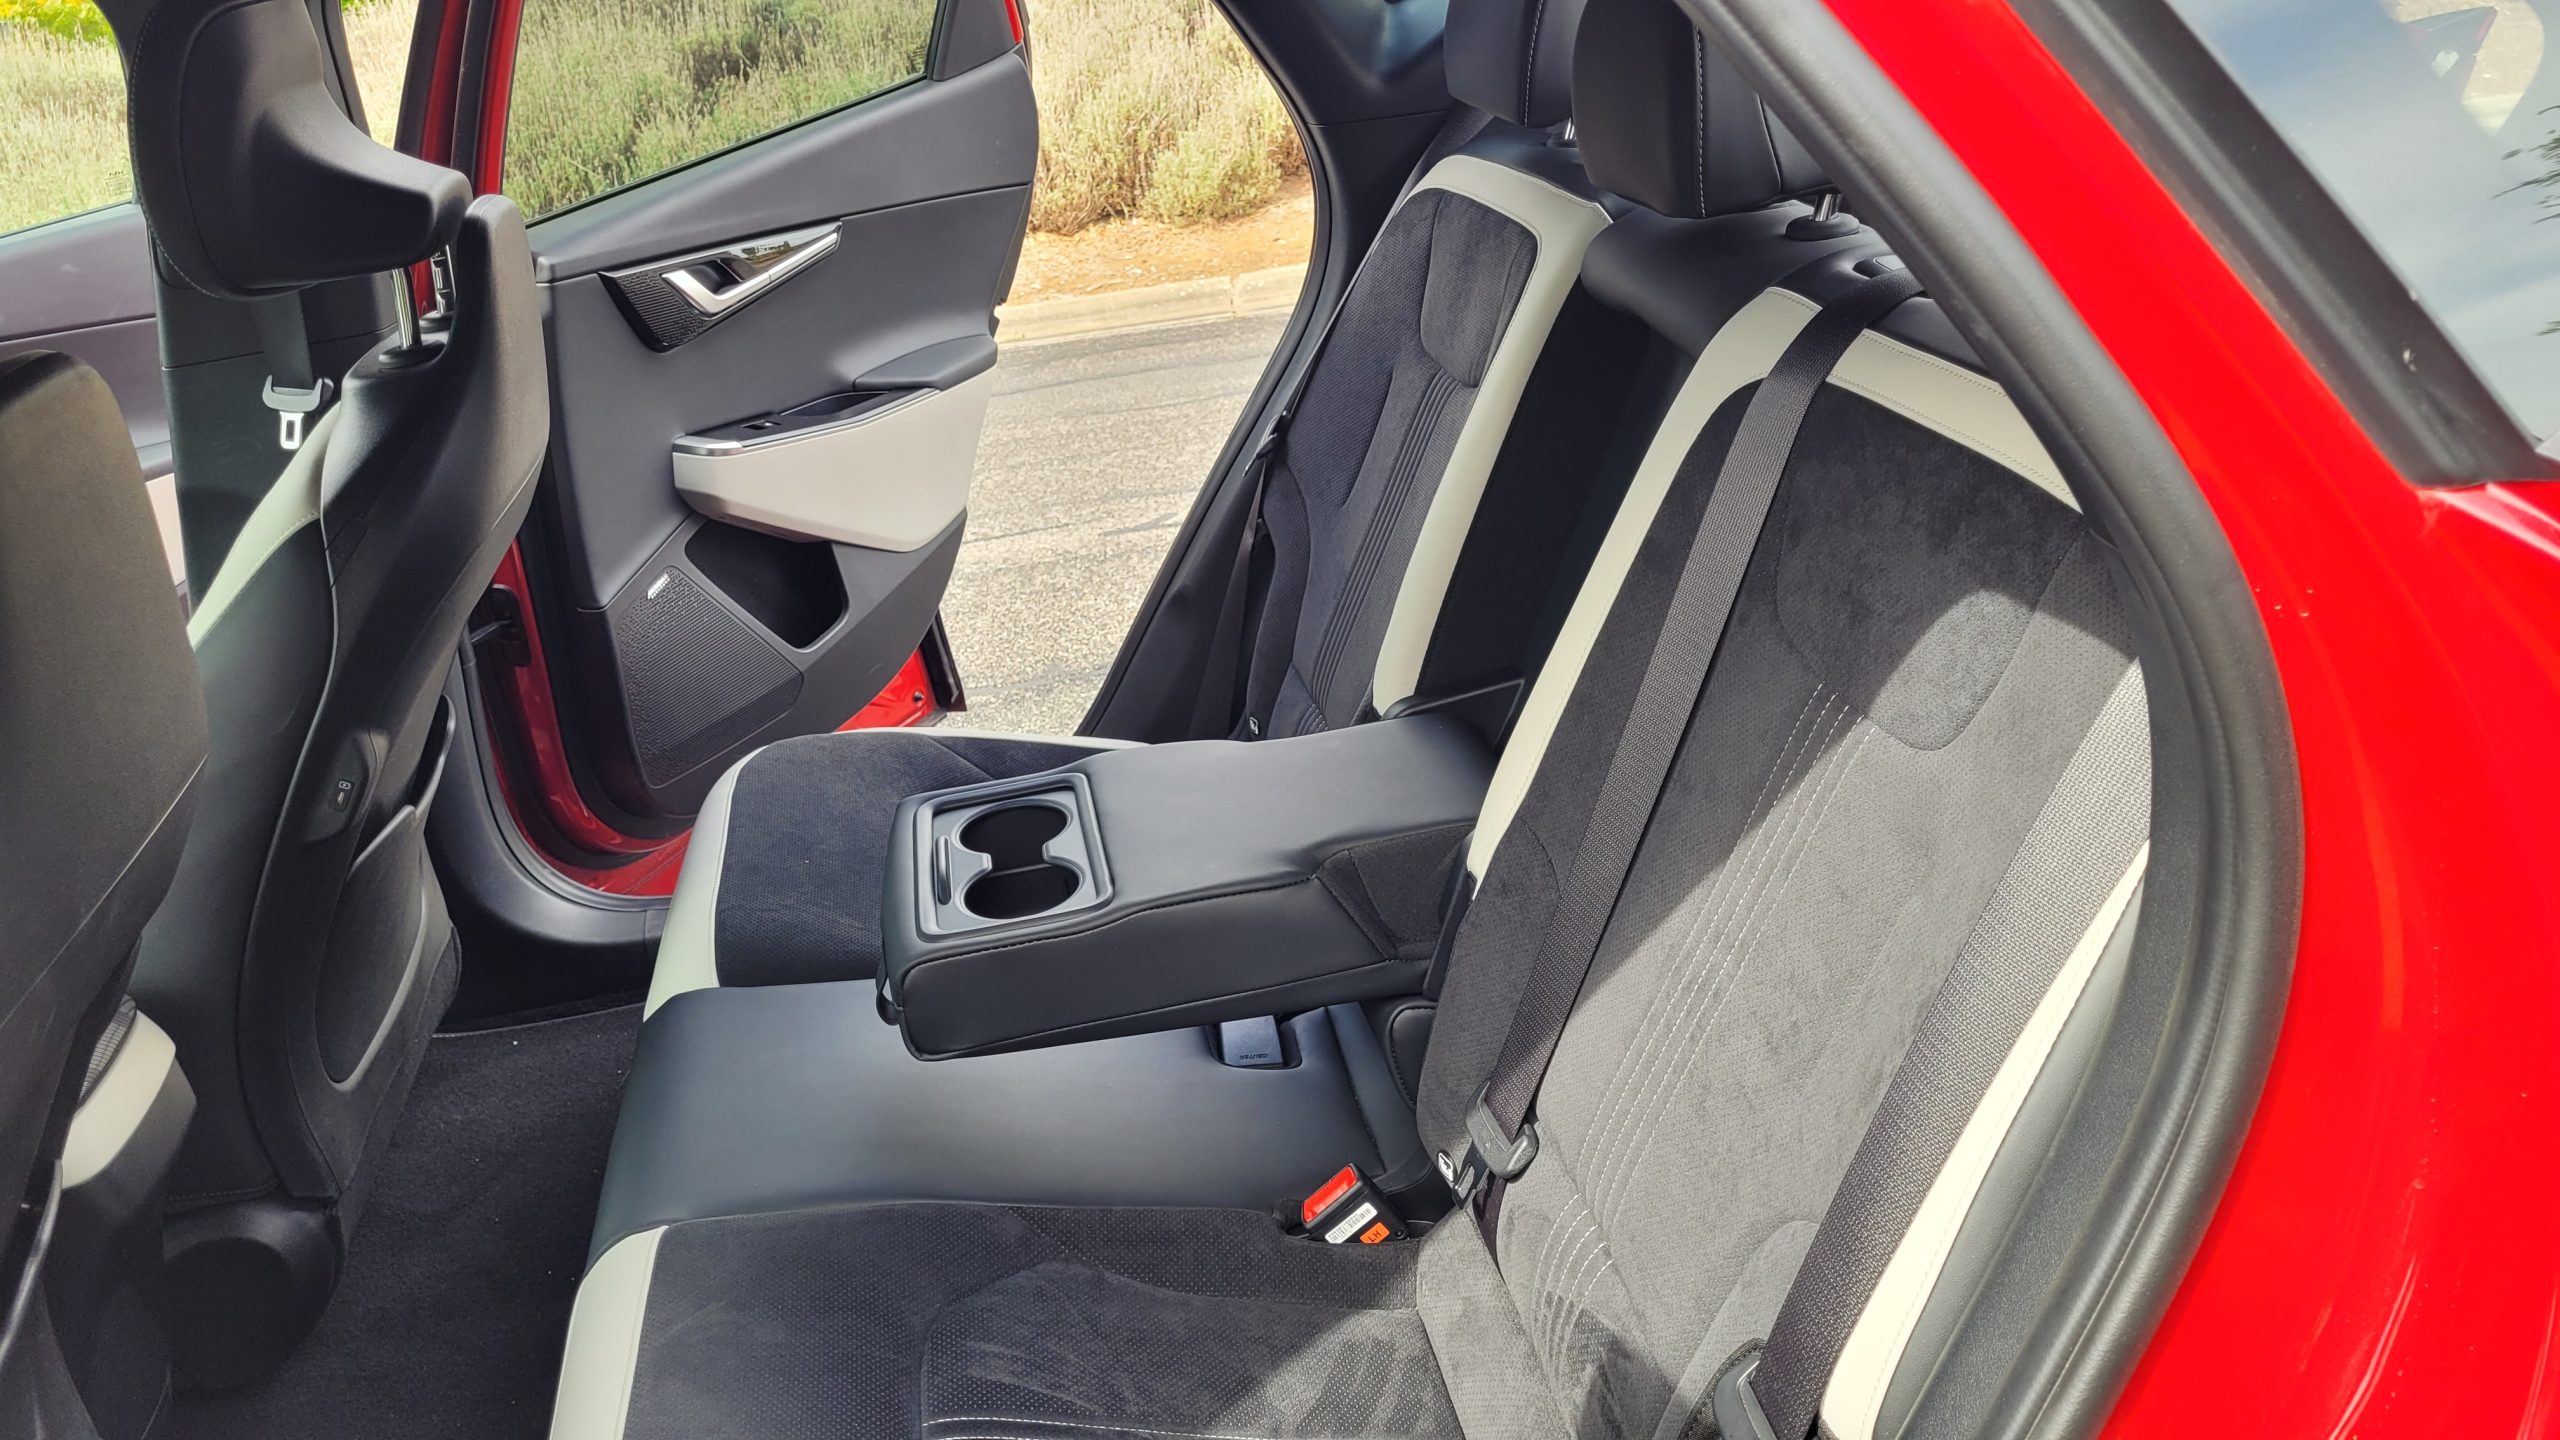 Red Kia EV6 GT-Line rear seat interior view with middle arm rest and cup holders in down position